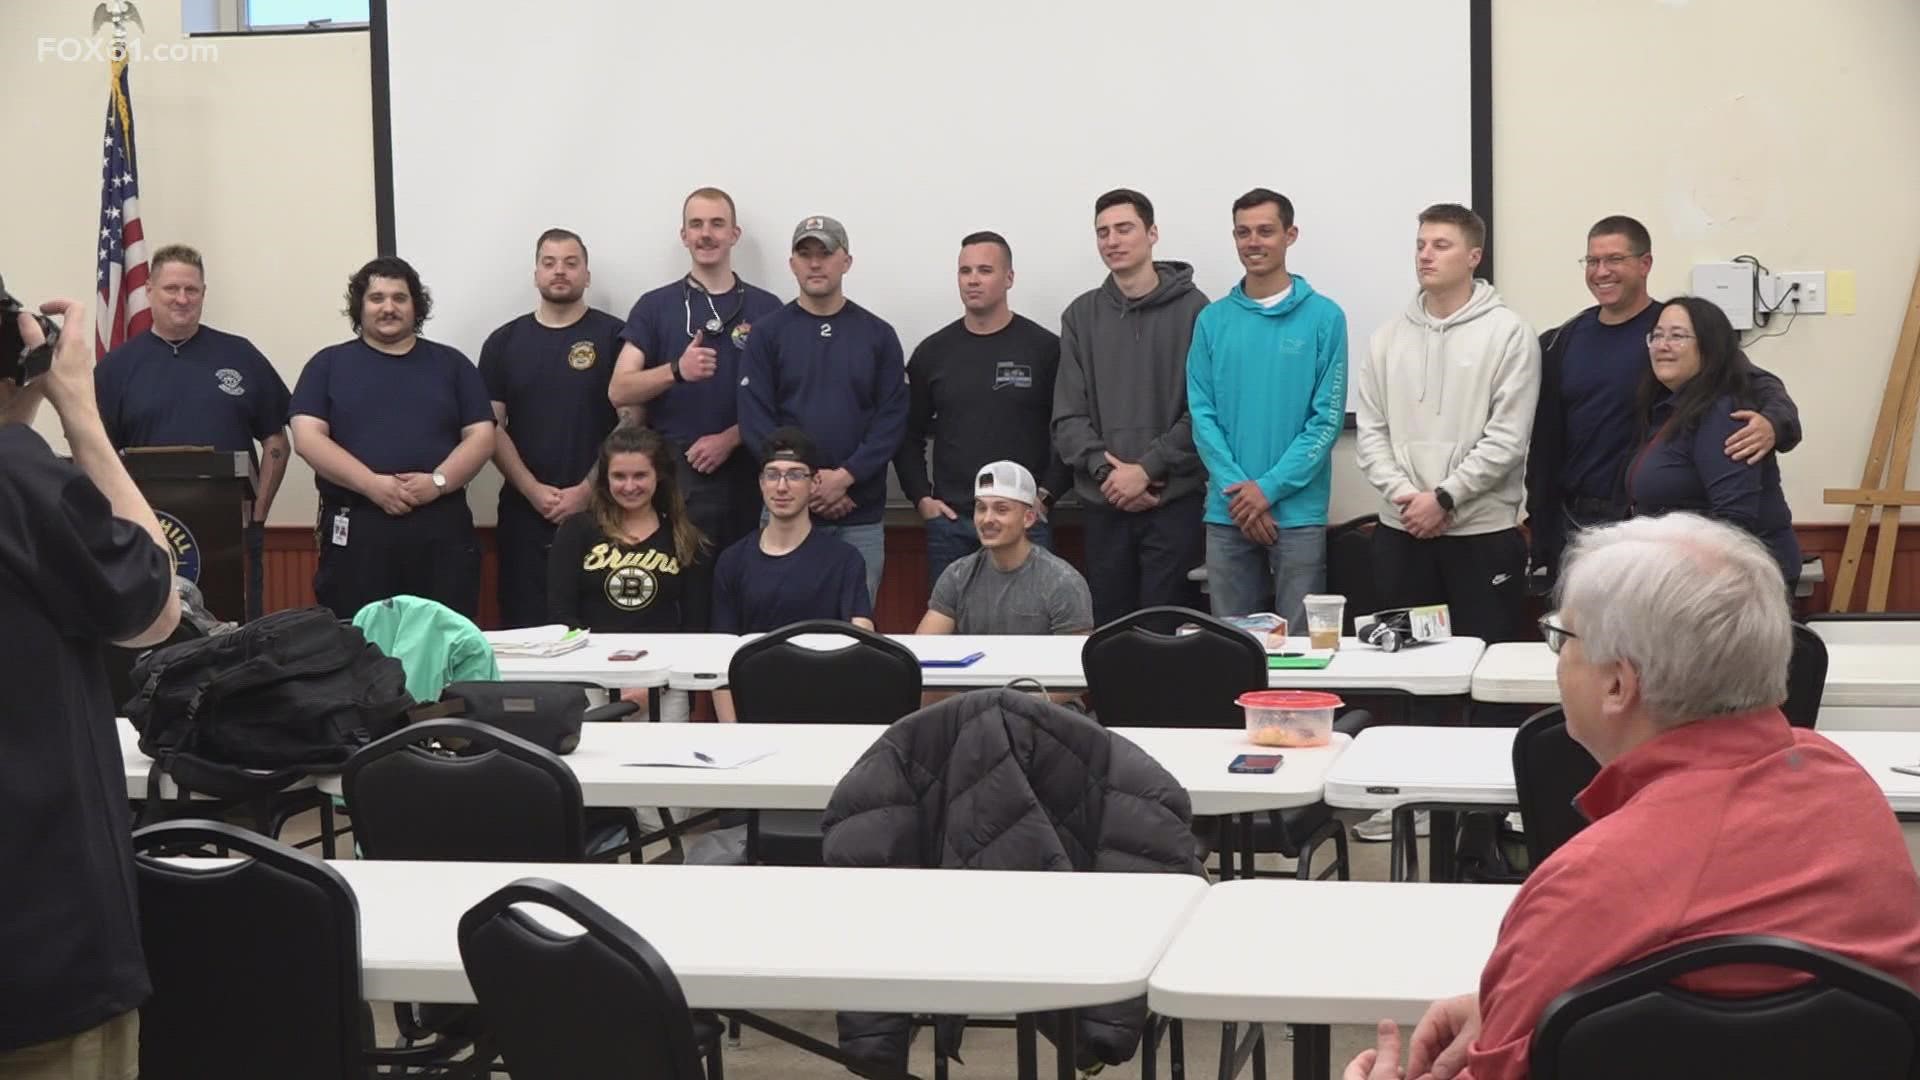 12 people received their EMT certifications Wednesday as the volunteer ambulance service industry faces staffing shortages, impacting surrounding agencies.